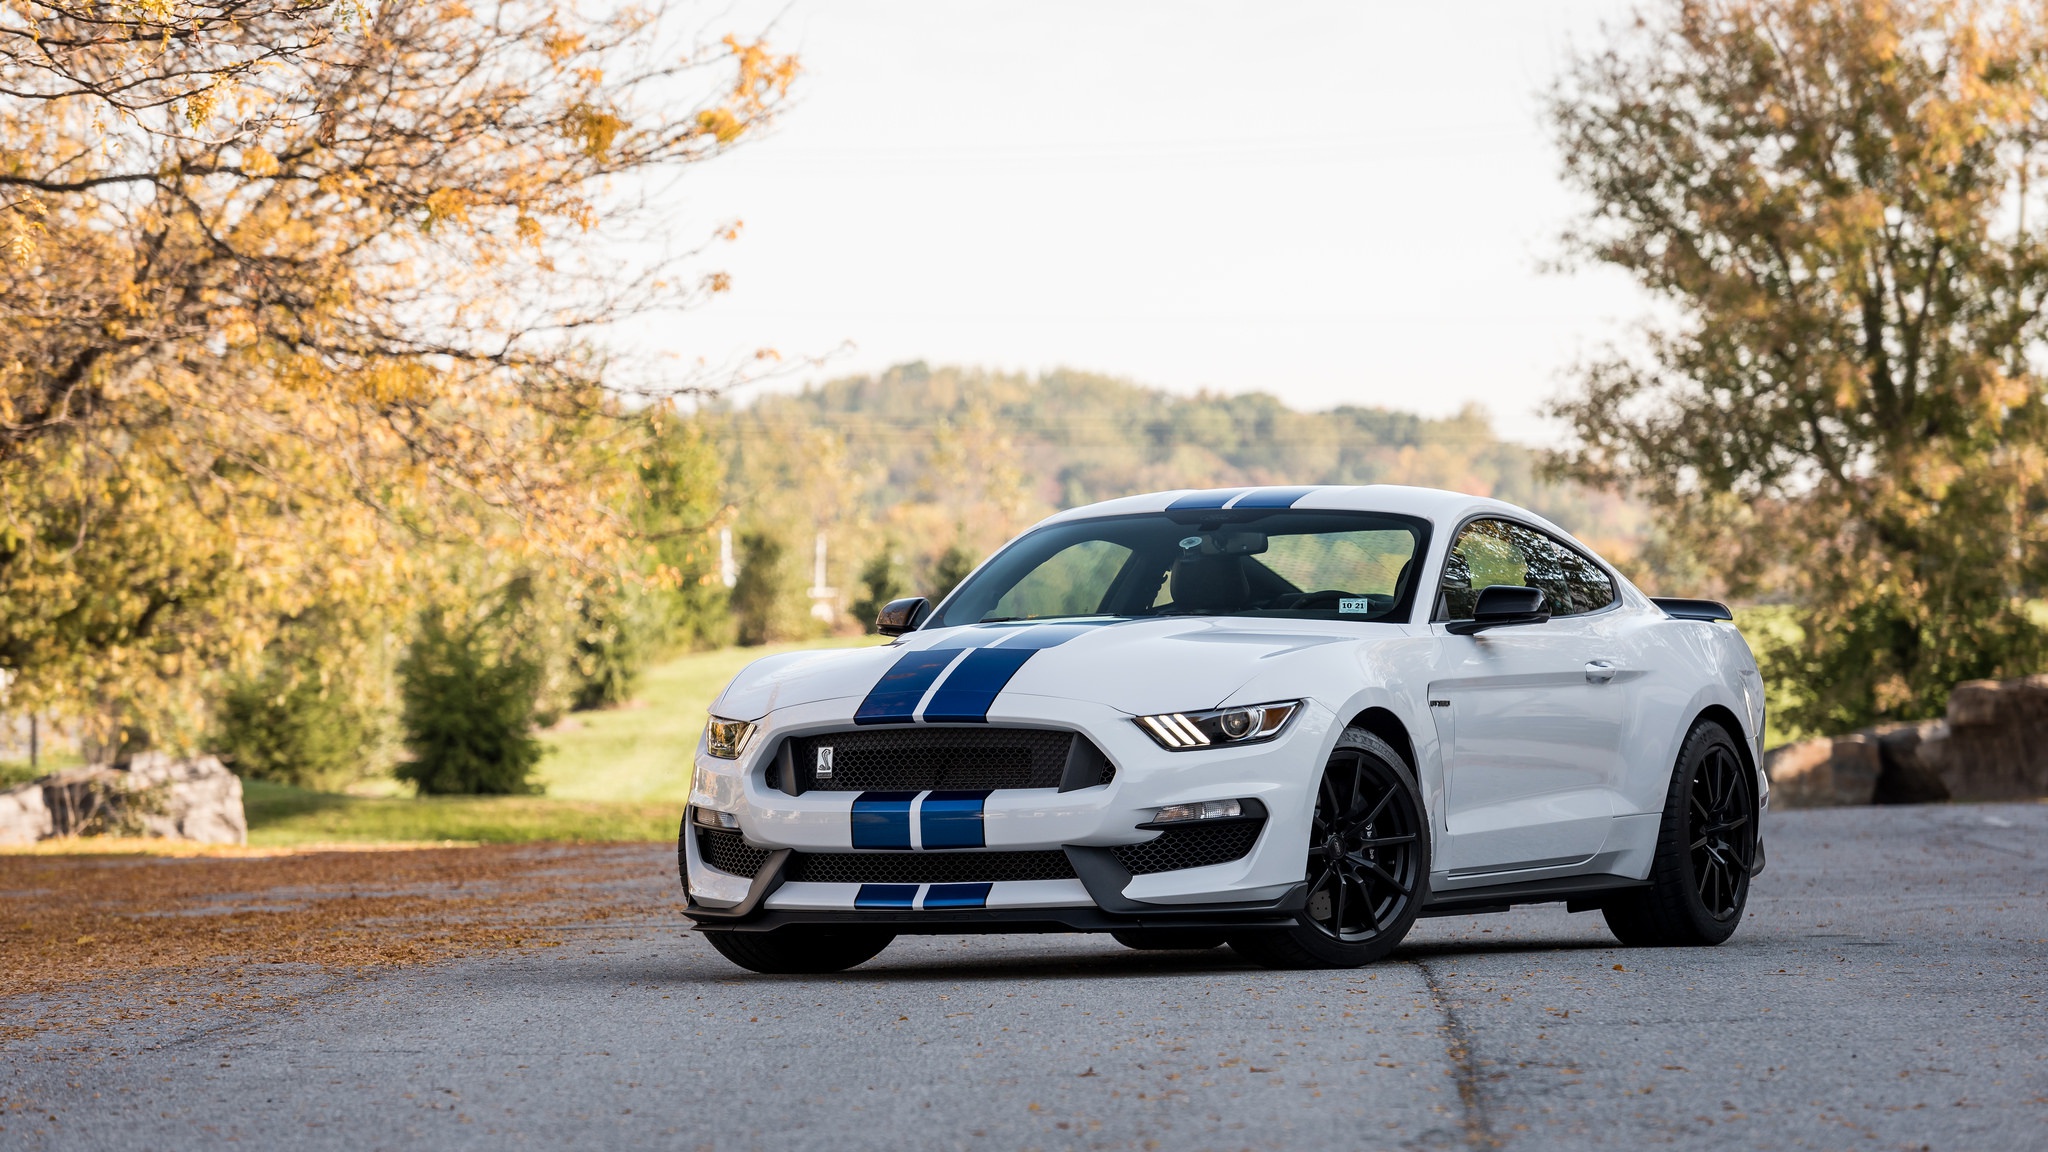 General 2048x1152 car nature depth of field Ford Mustang Shelby Ford Ford Mustang Ford Mustang S550 muscle cars American cars